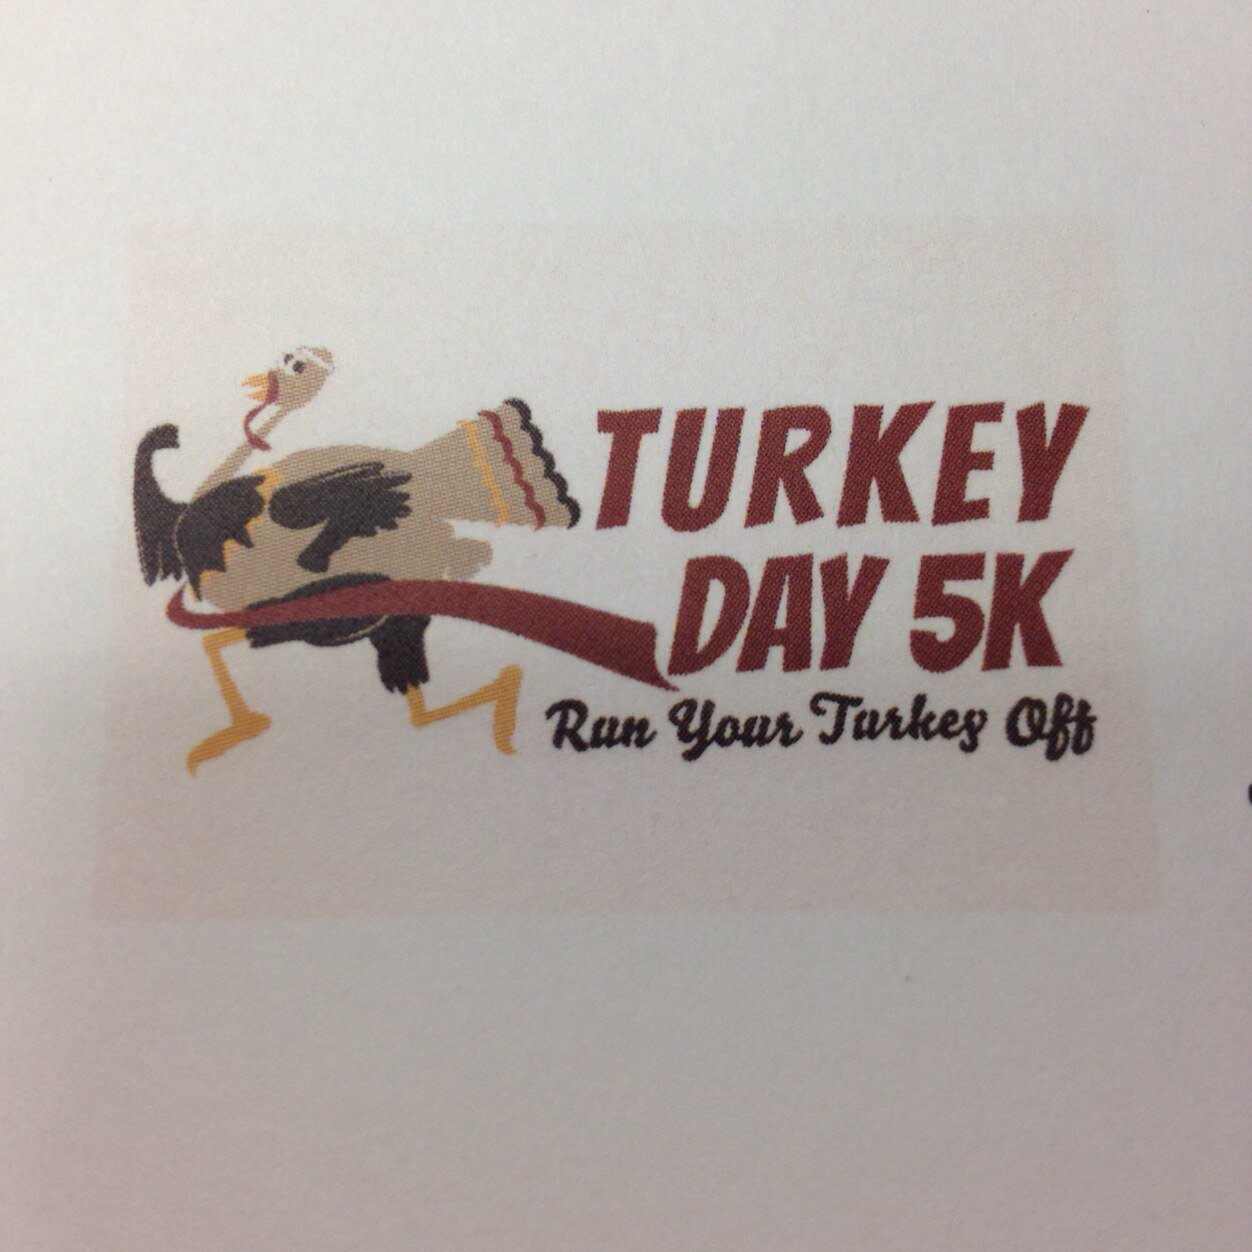 Turkey Day 5k is the first and only Thanksgiving Day 5k run in Norman, OK!